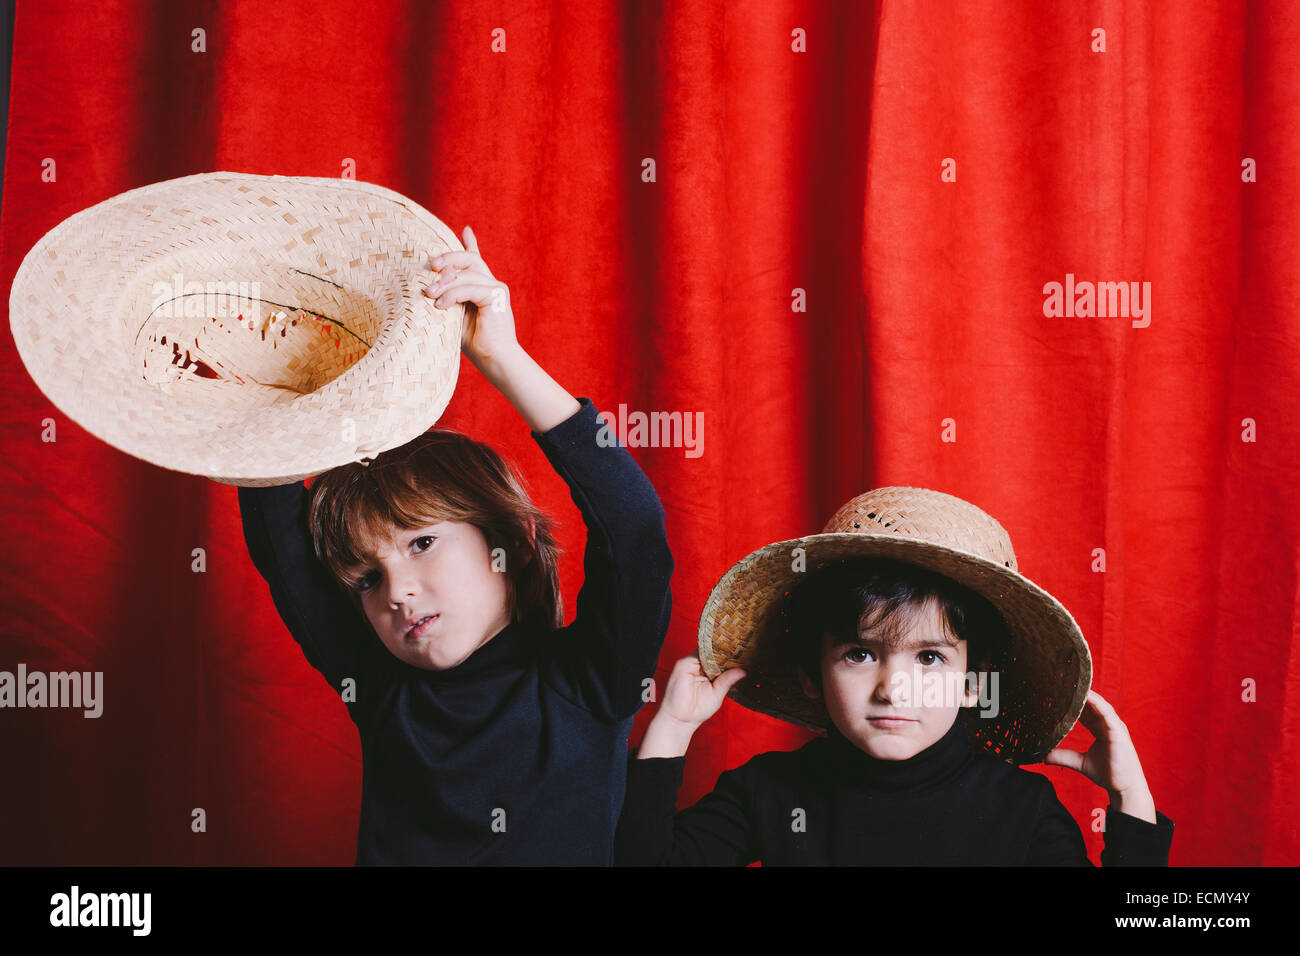 Studio portrait of two boys wearing black clothes and a straw hat Stock Photo